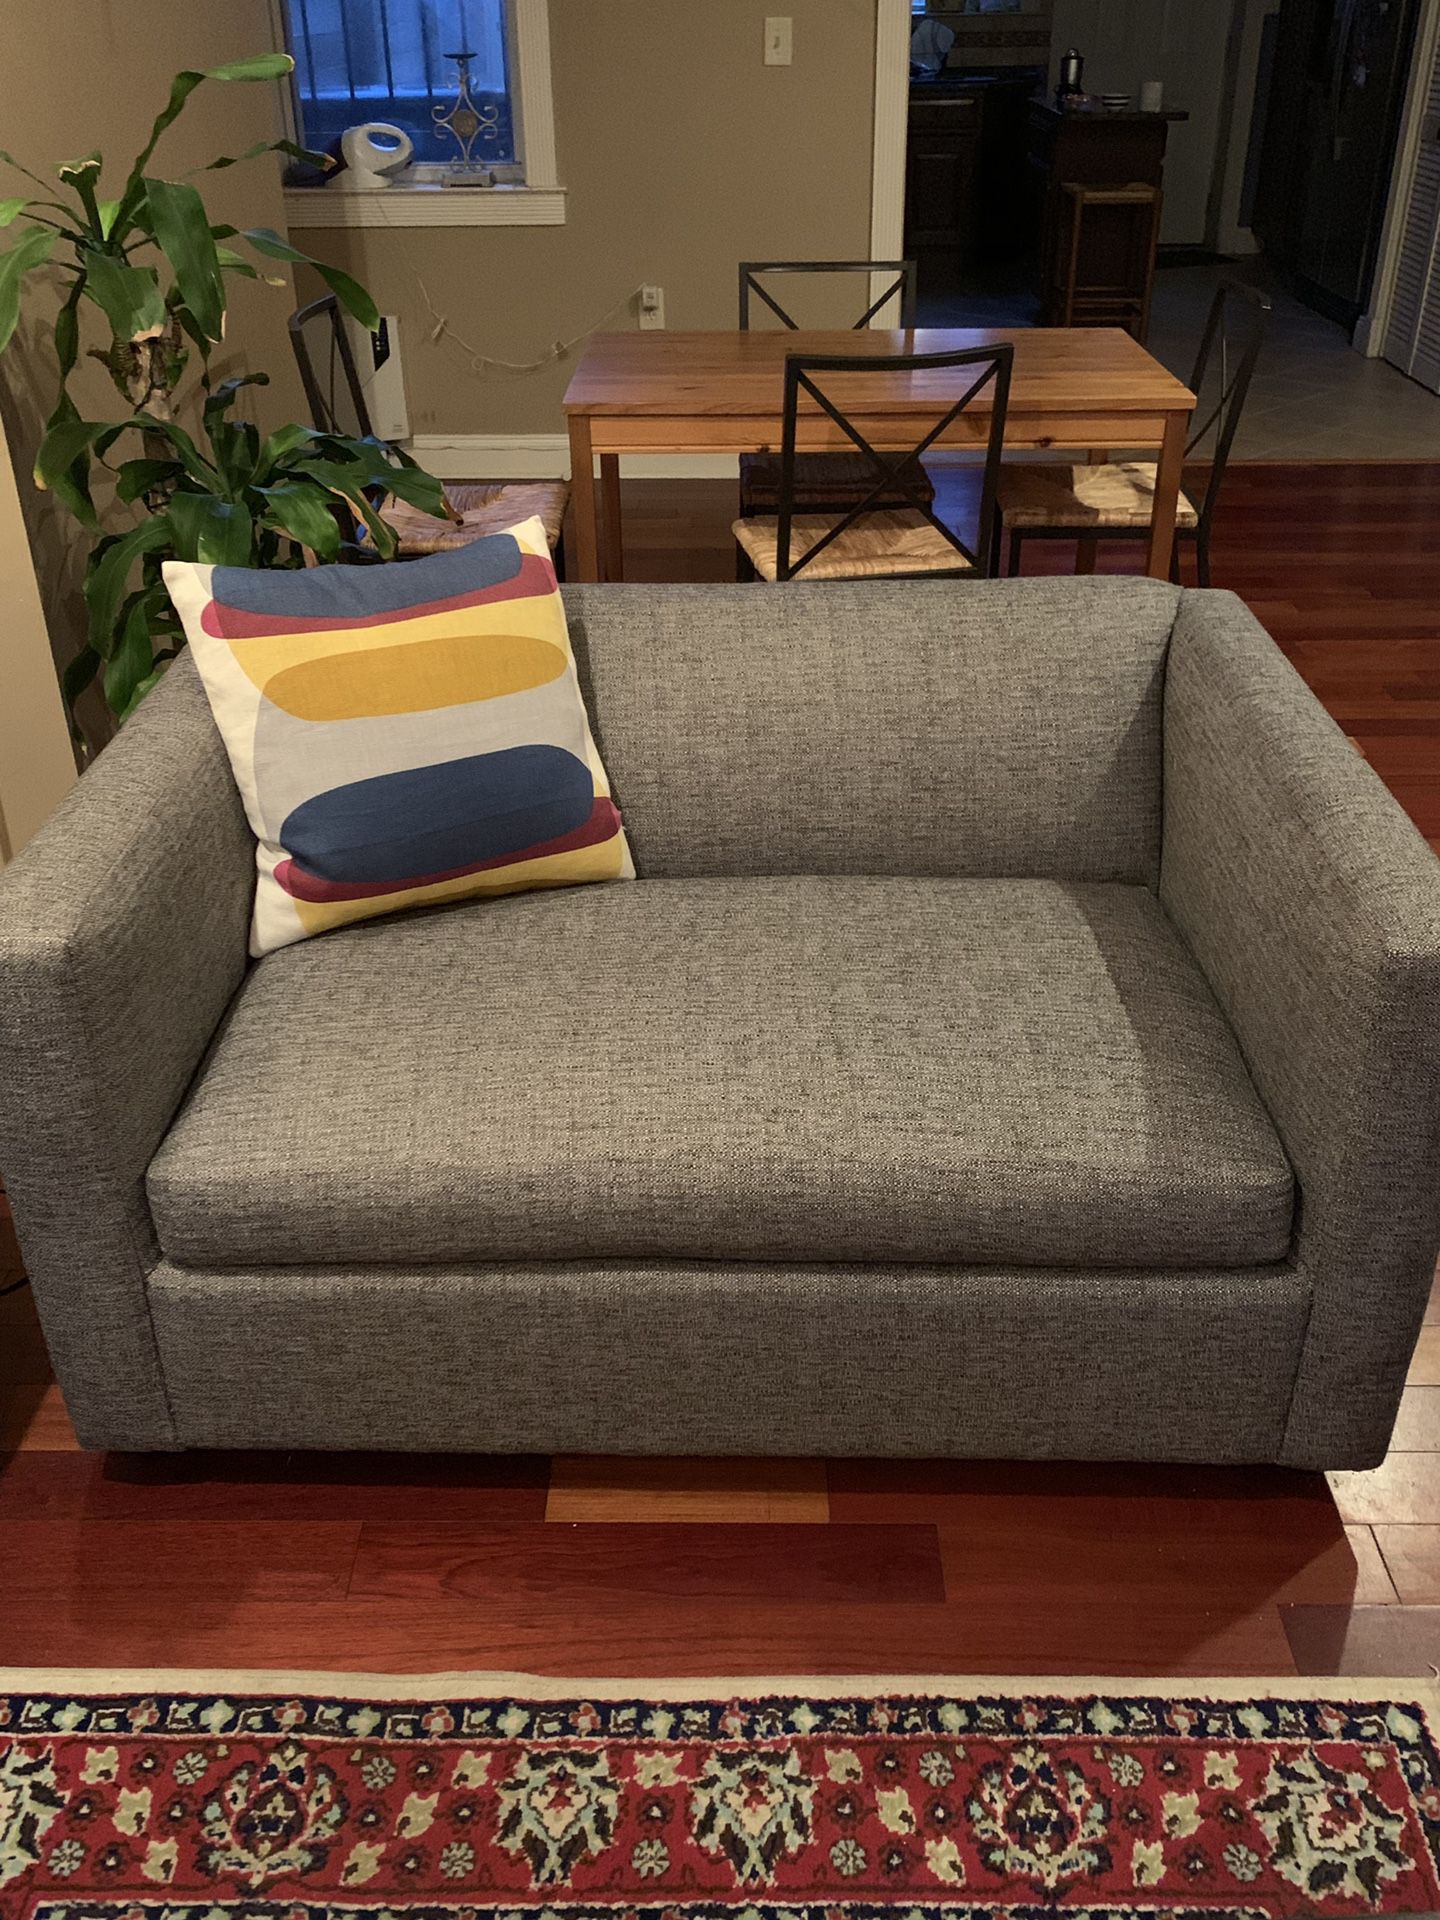 Upscale pullout couch (CB2)